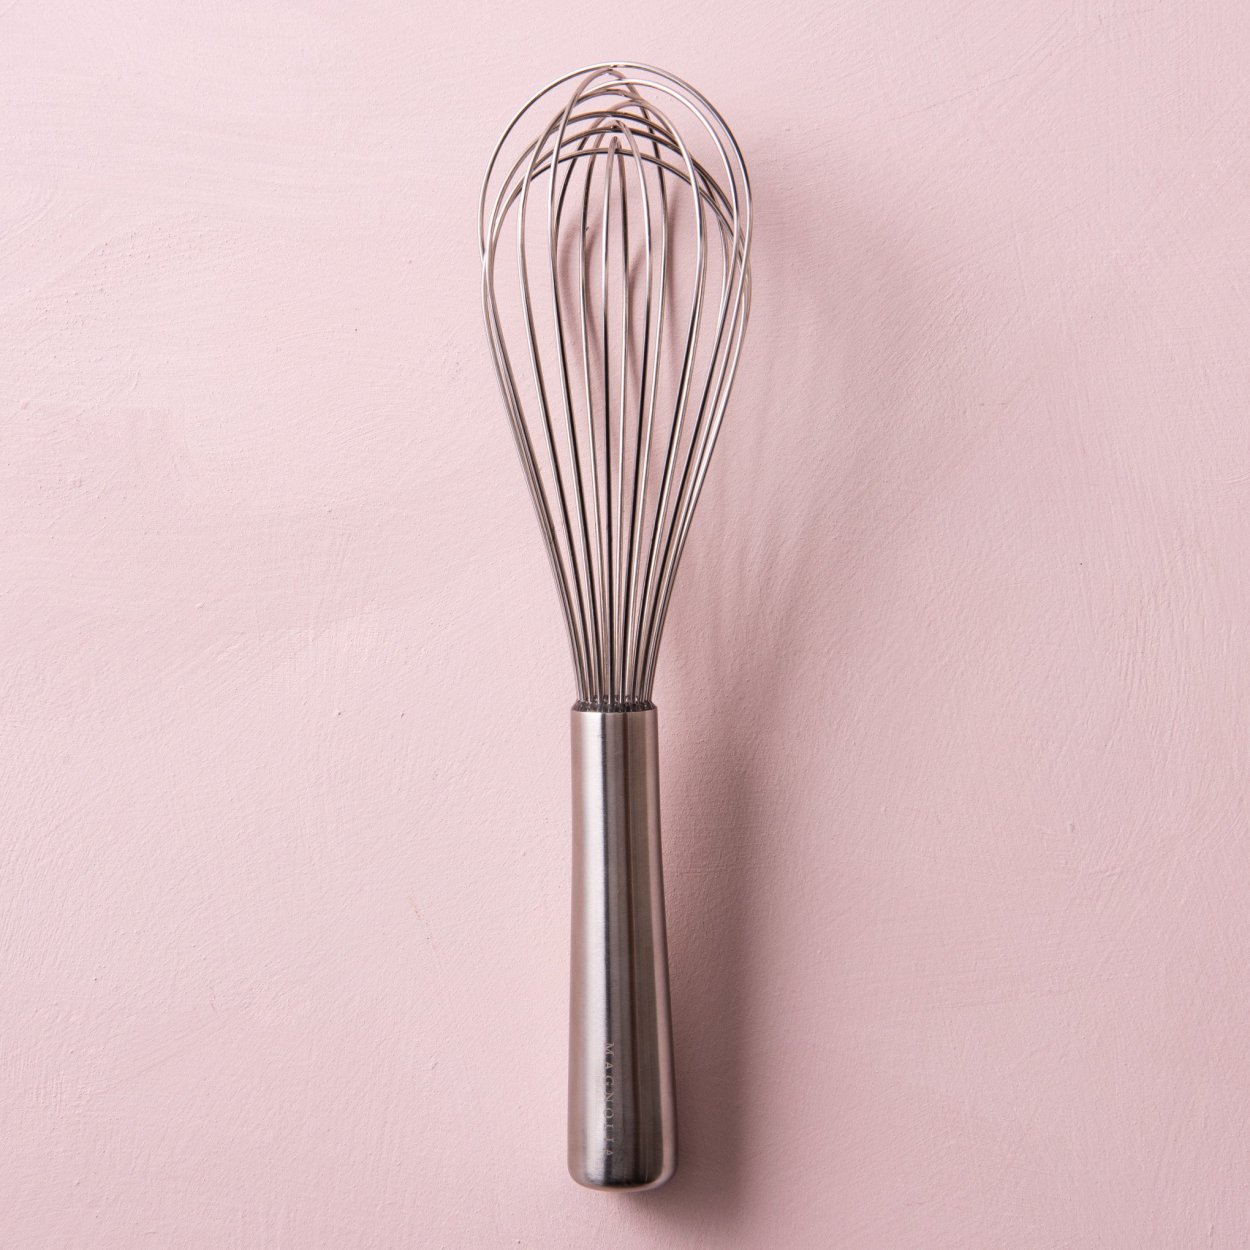 STAINLESS STEEL SAUCE WHISK WITH HOOK - PURCHASE OF